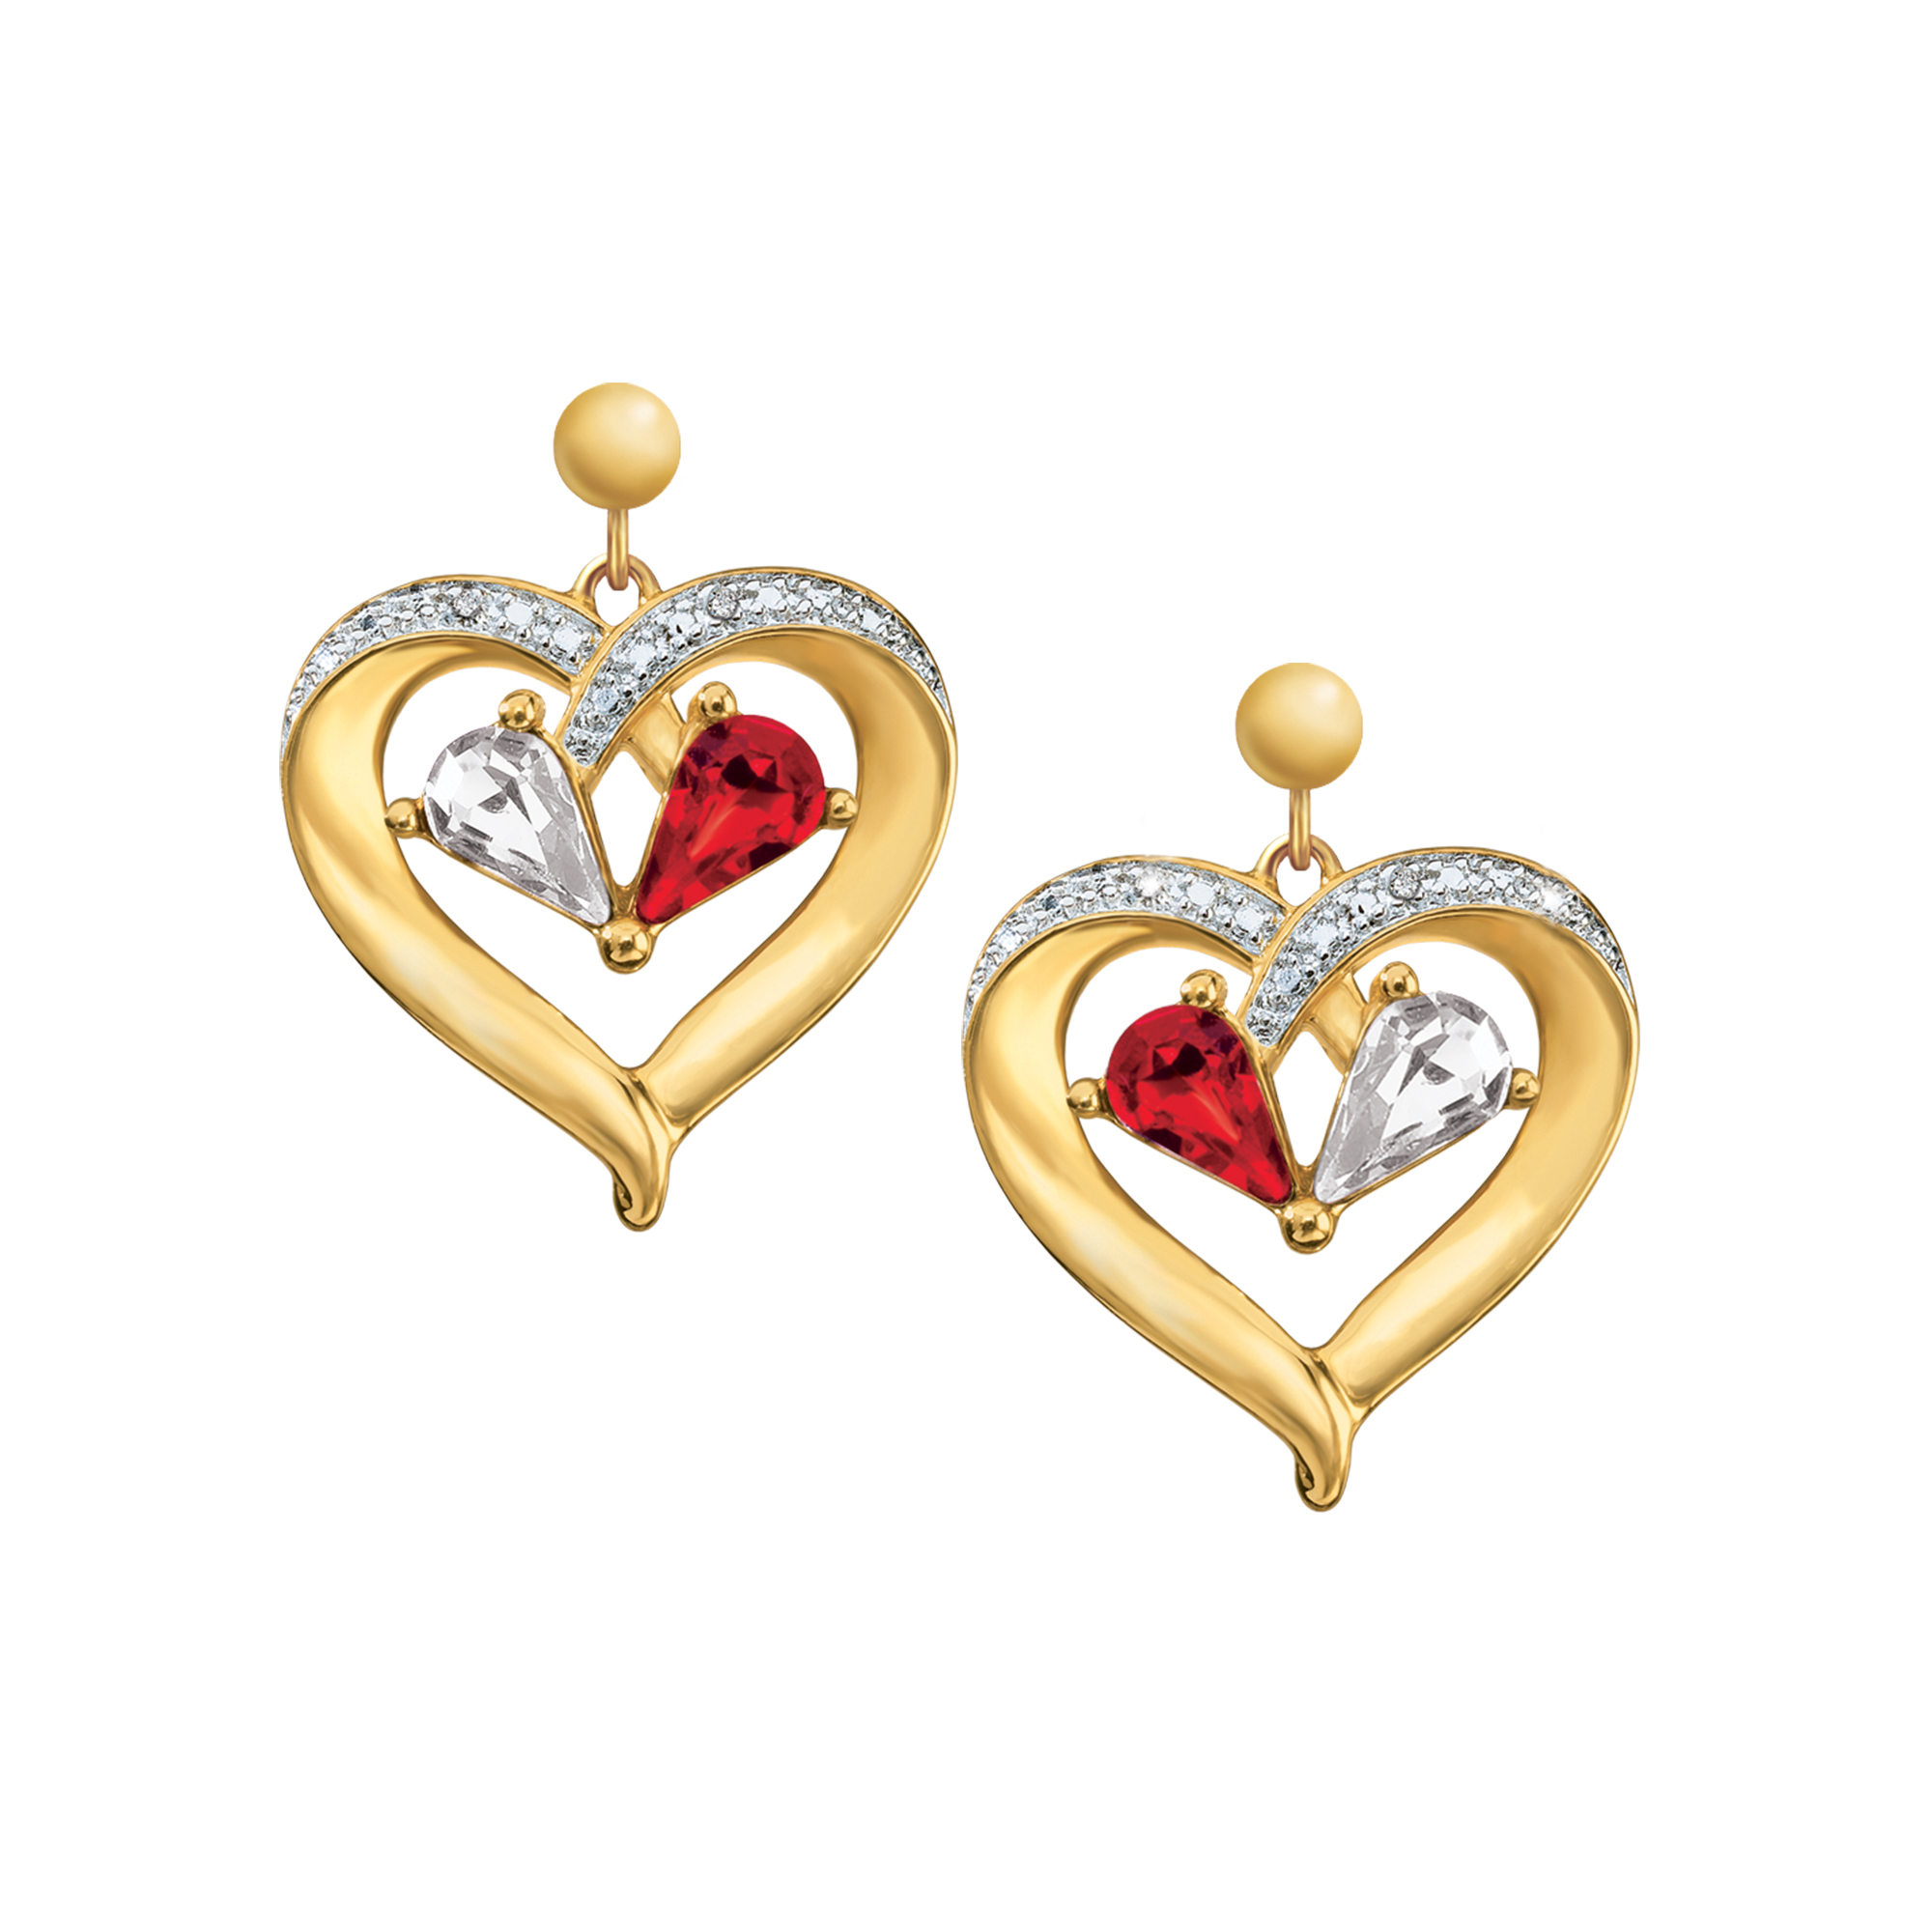 Heart Gemstone Earrings, Valentines day earrings, Mix and Match